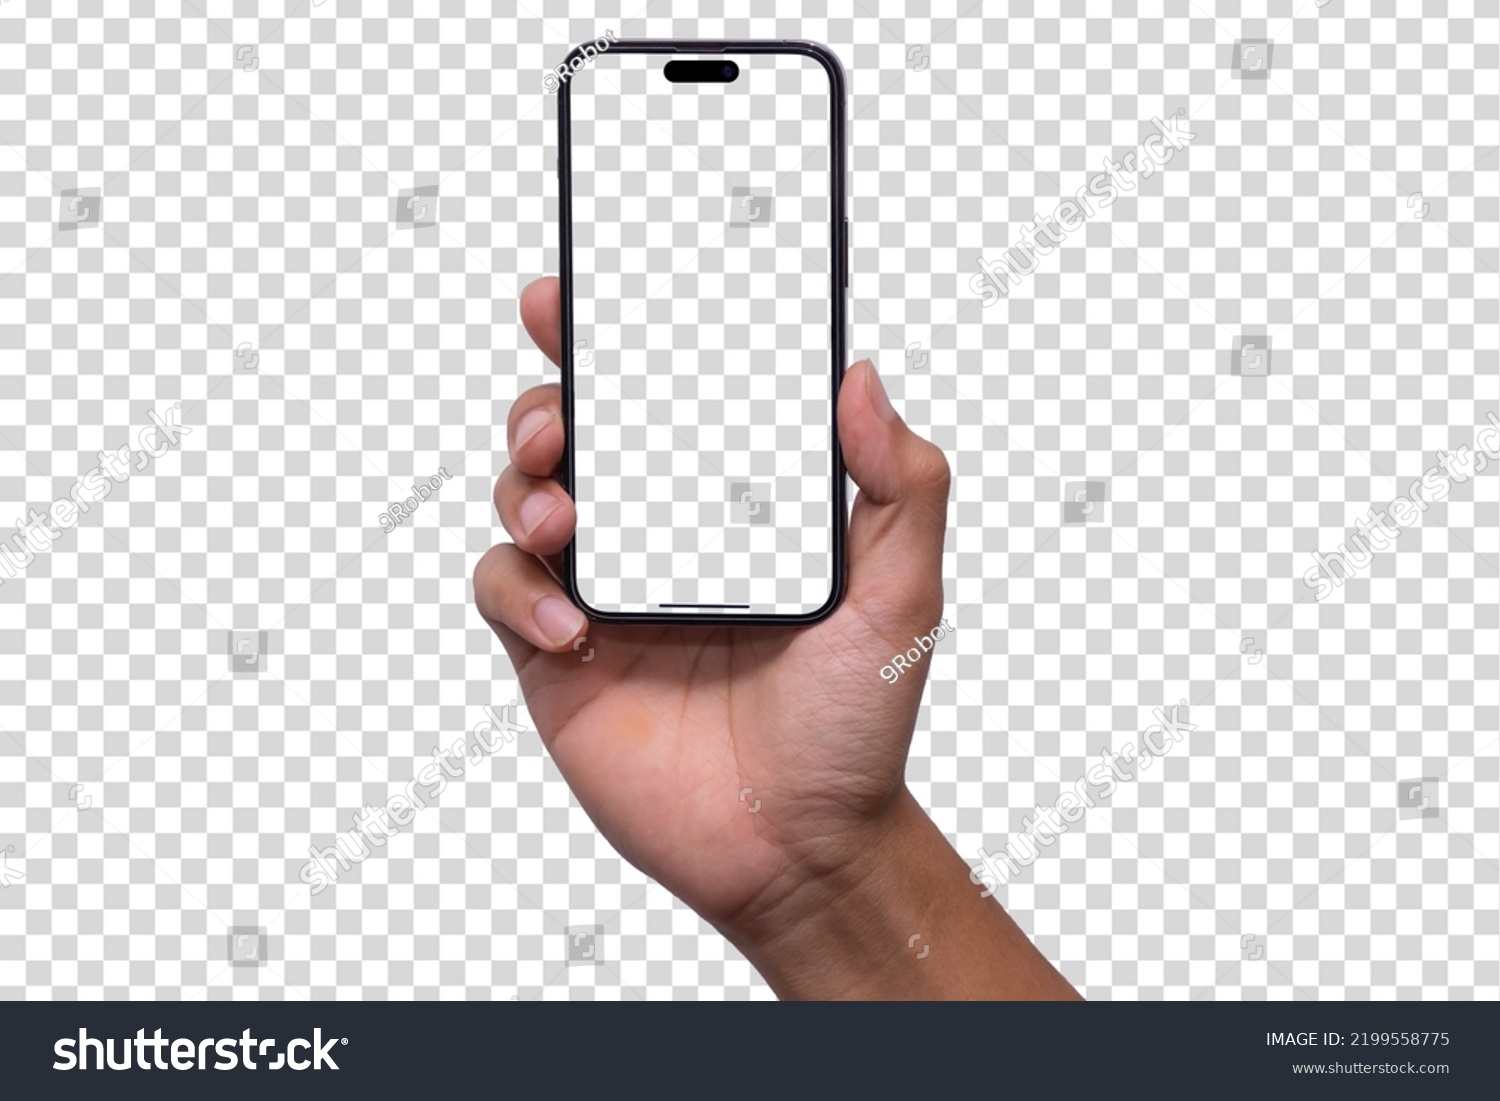 Hand holding smart phone Mockup  and screen Transparent and Clipping Path isolated for Infographic Business web site design app #2199558775